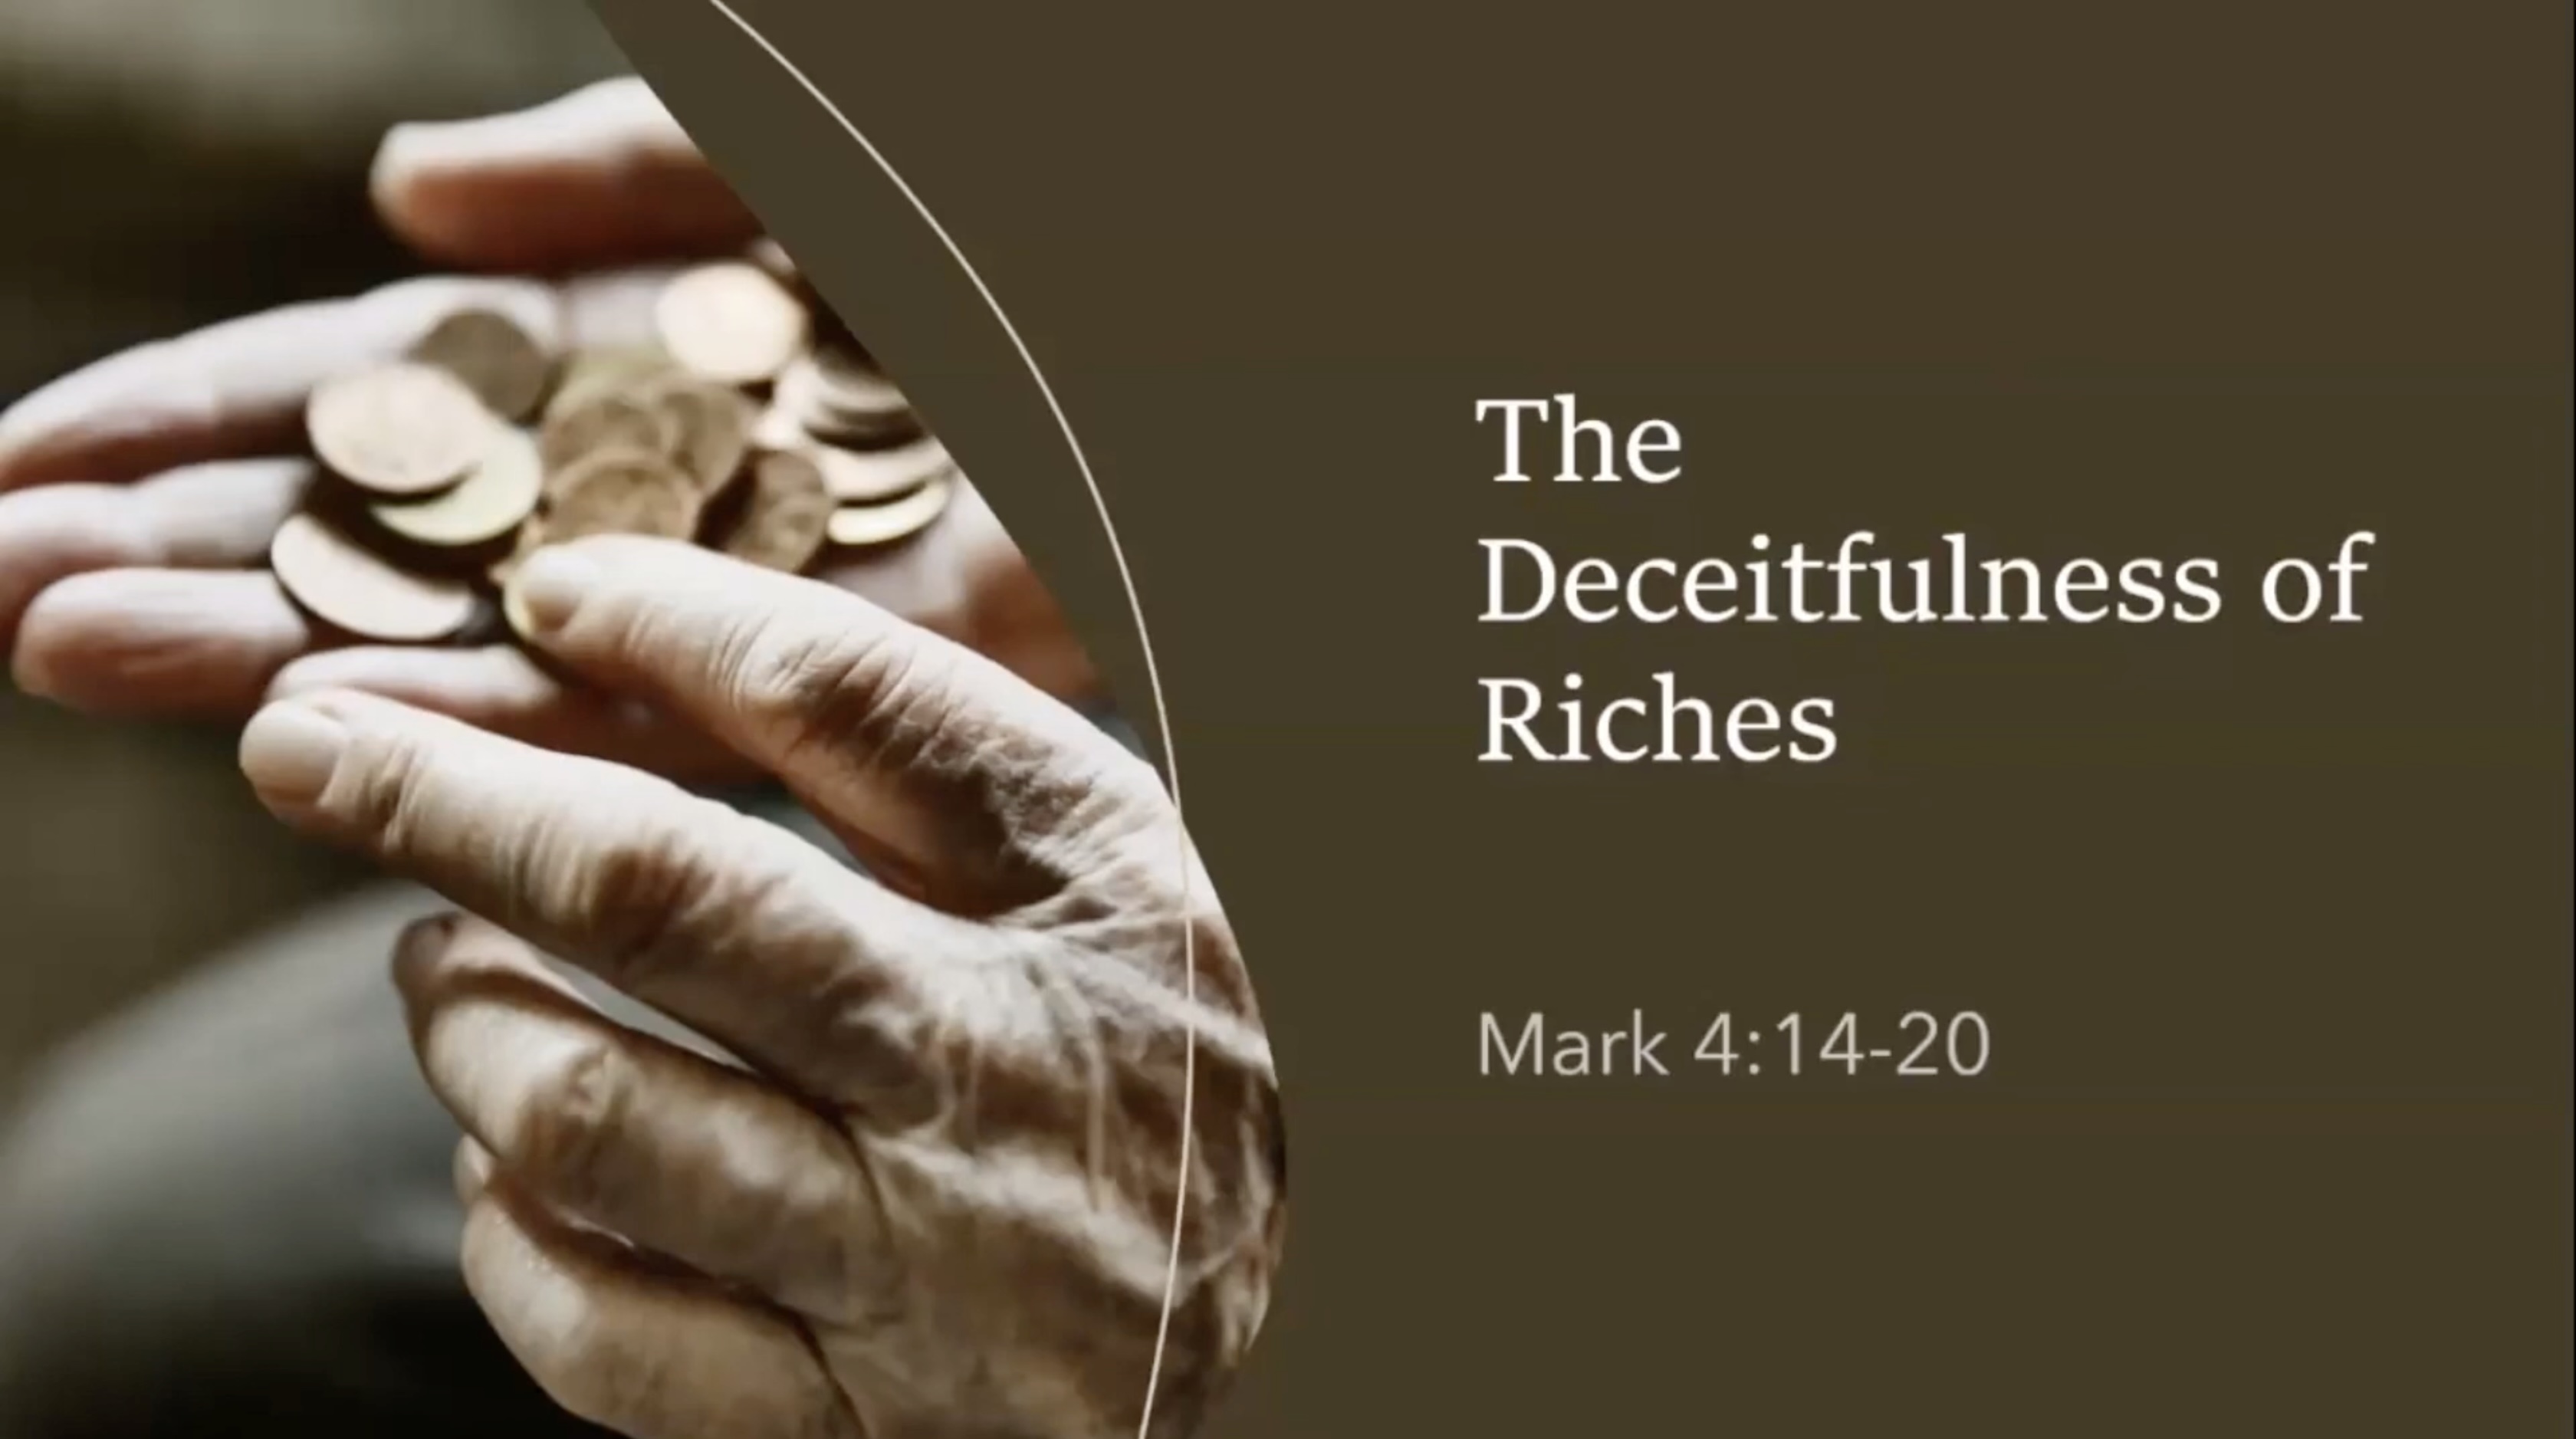 The Deceitfulness of Riches